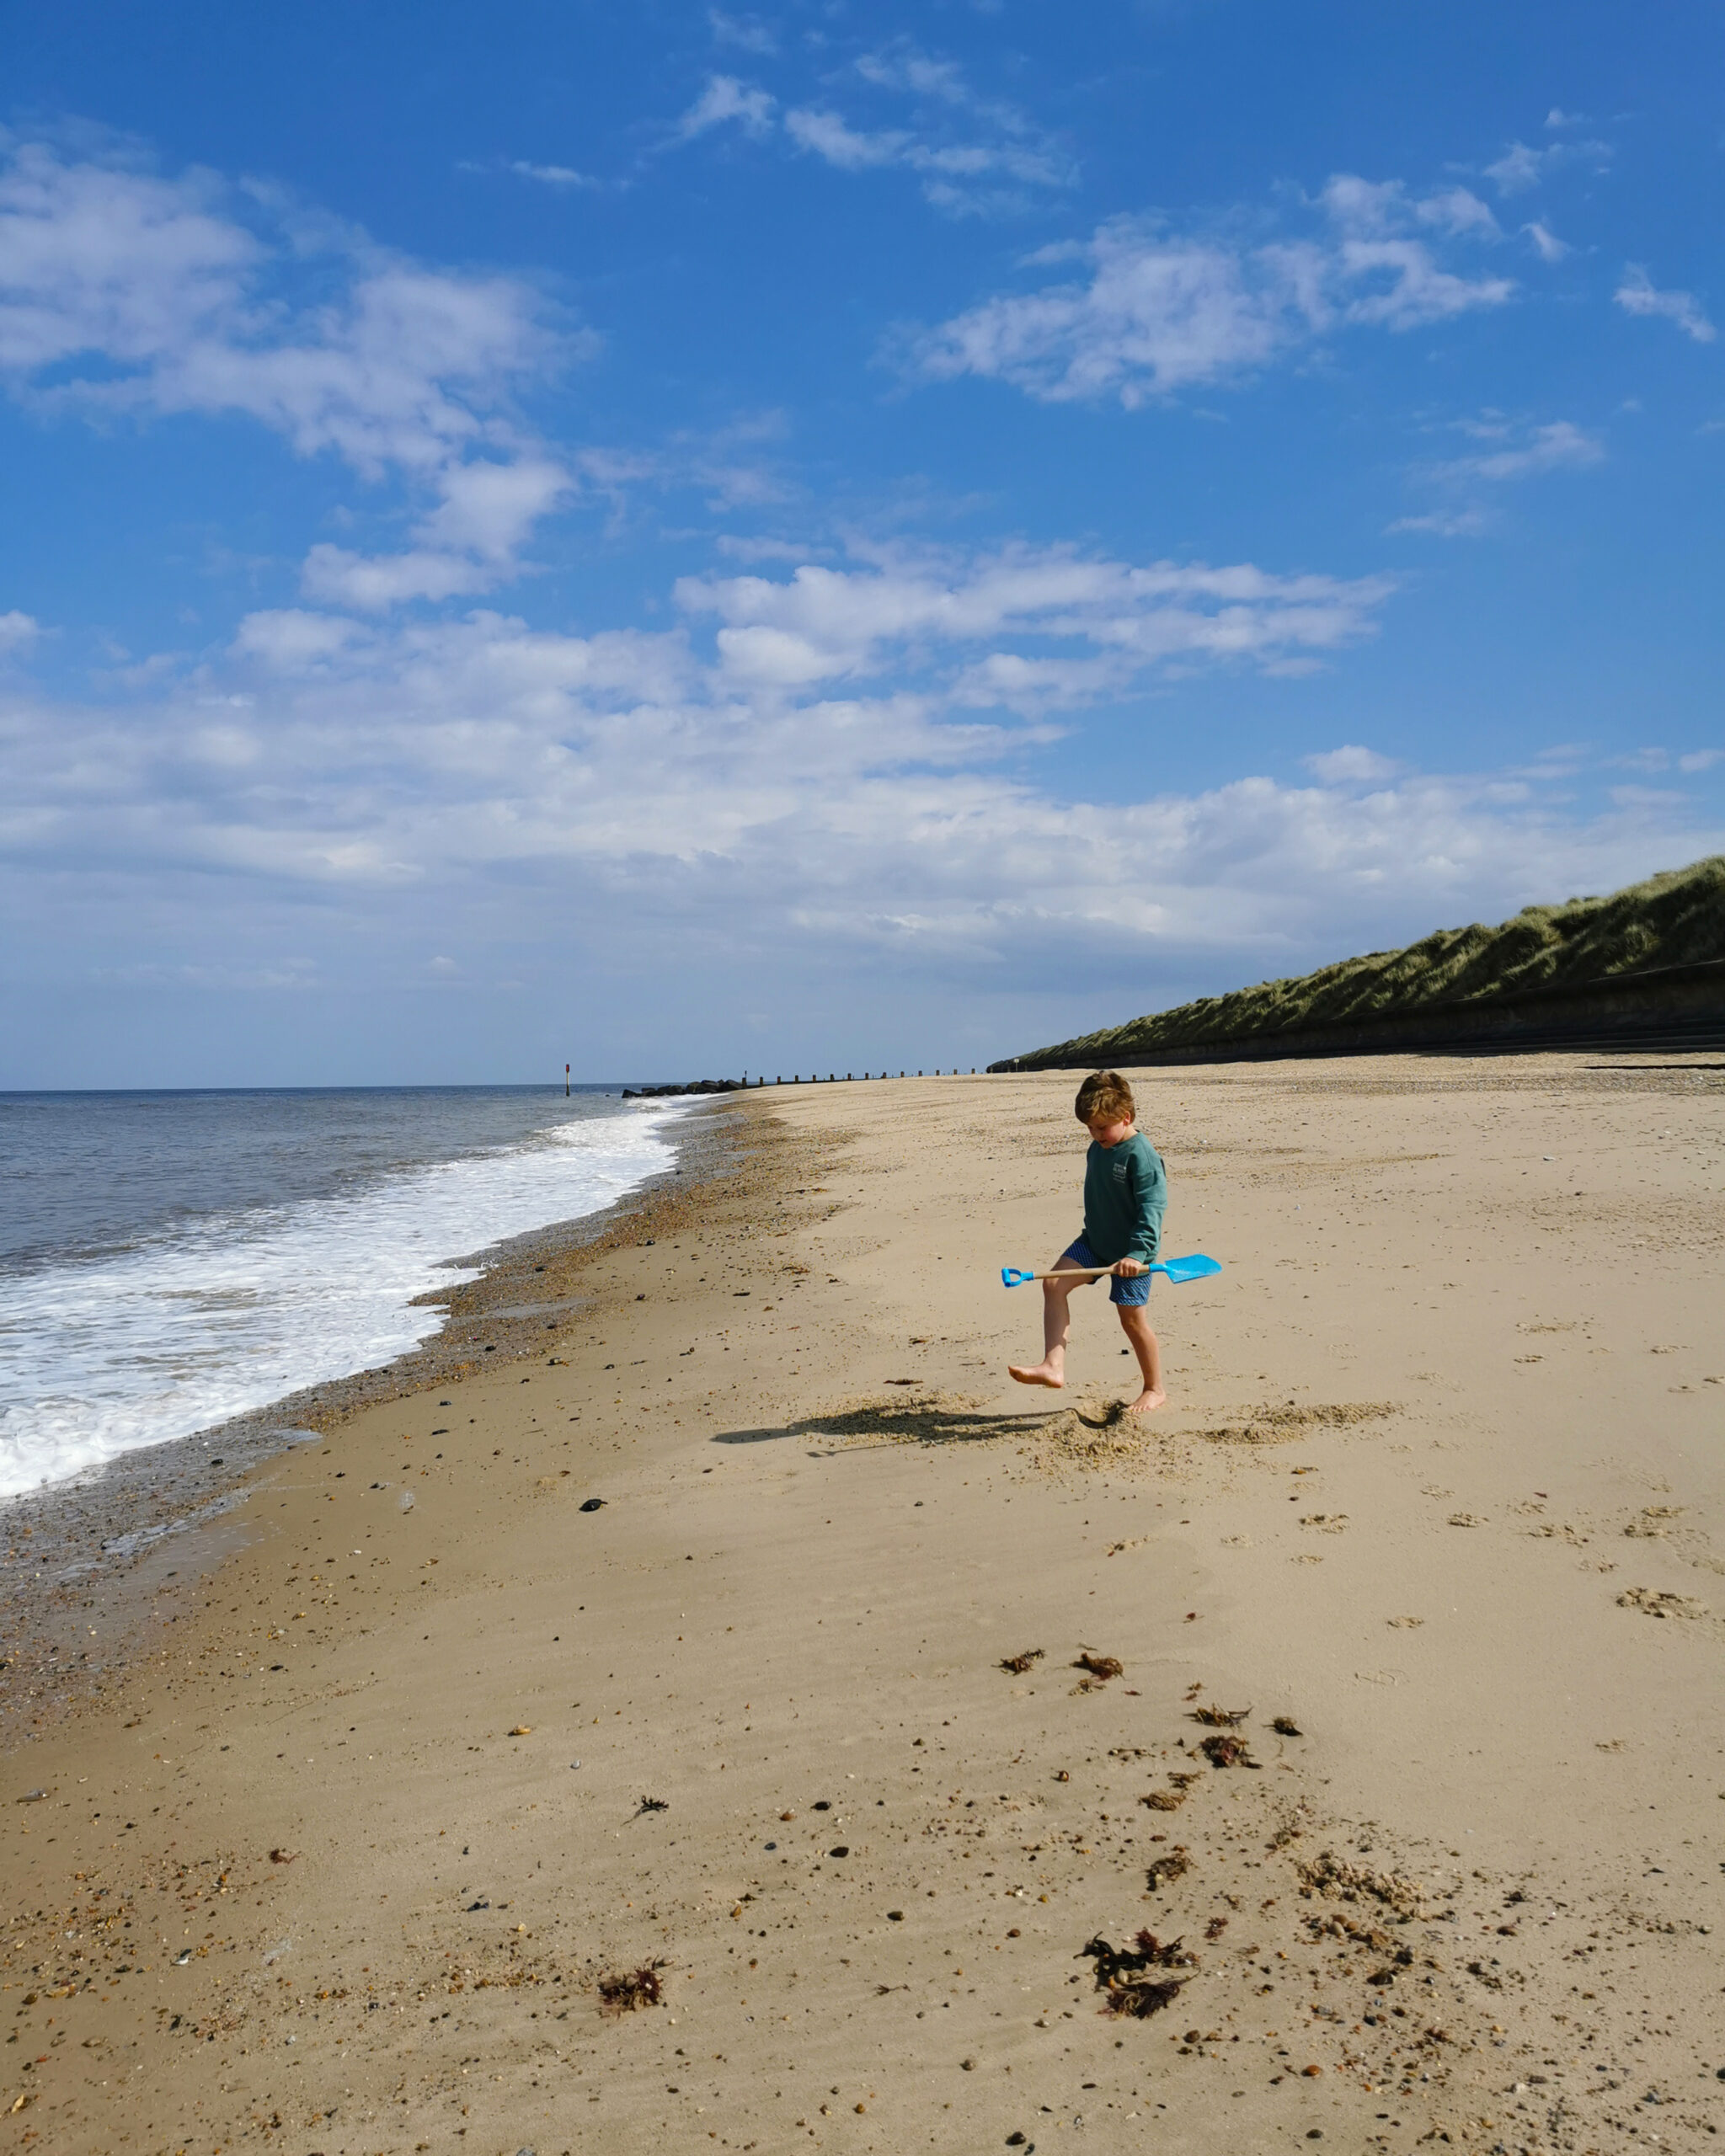 Lovat Parks Holidays, Waxham Sands Holiday Park, Visit Norfolk, Family-Friendly, Luxury Holidays Park, Lodges, Family Staycation, Family Holiday, the Frenchie Mummy, Travel Reviews, Great Yarmouth, Norfolk Beach, Camping Sites